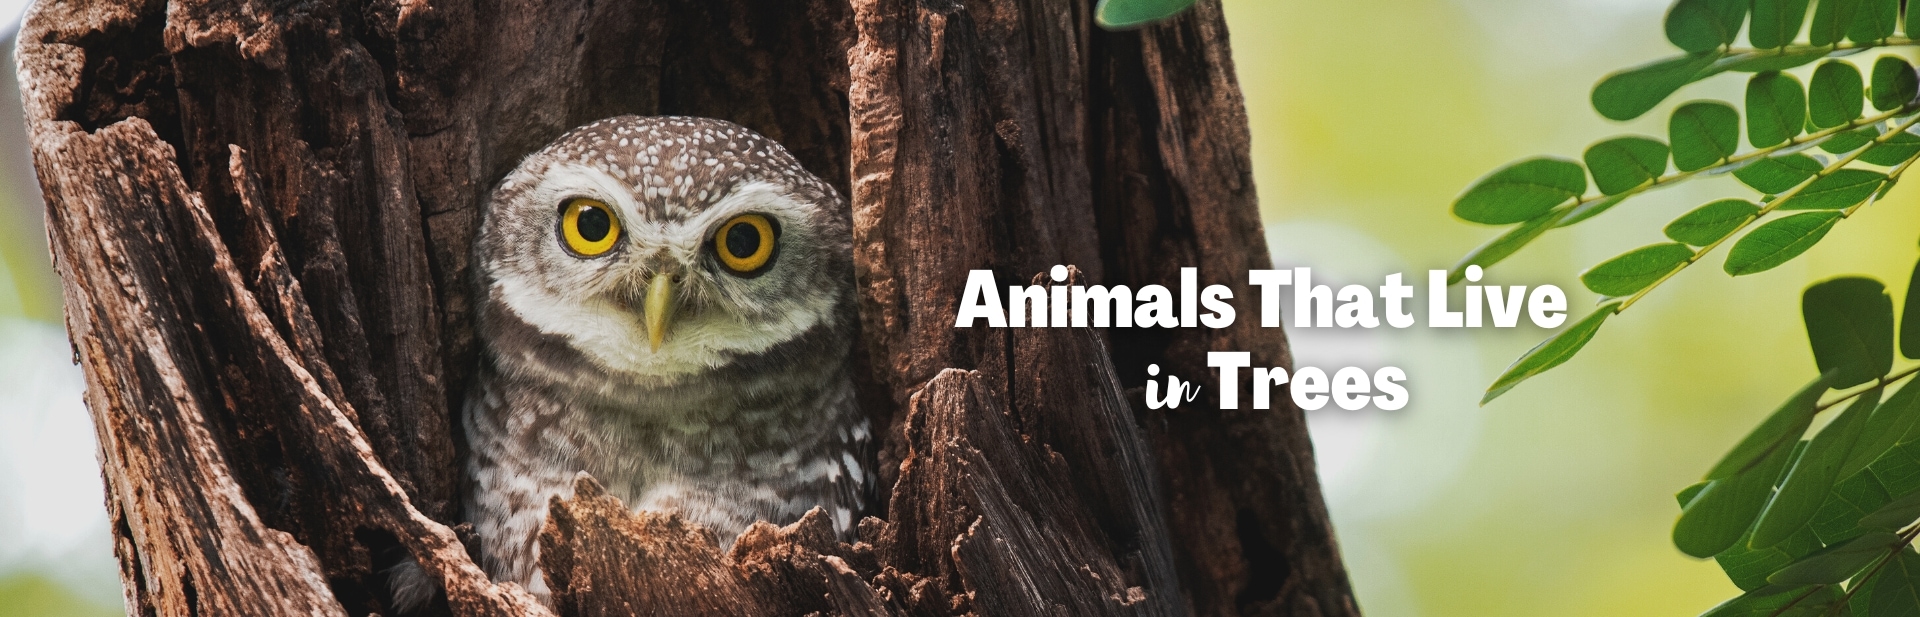 Exploring the Treetops: A Guide to 40 Animals That Live In Trees